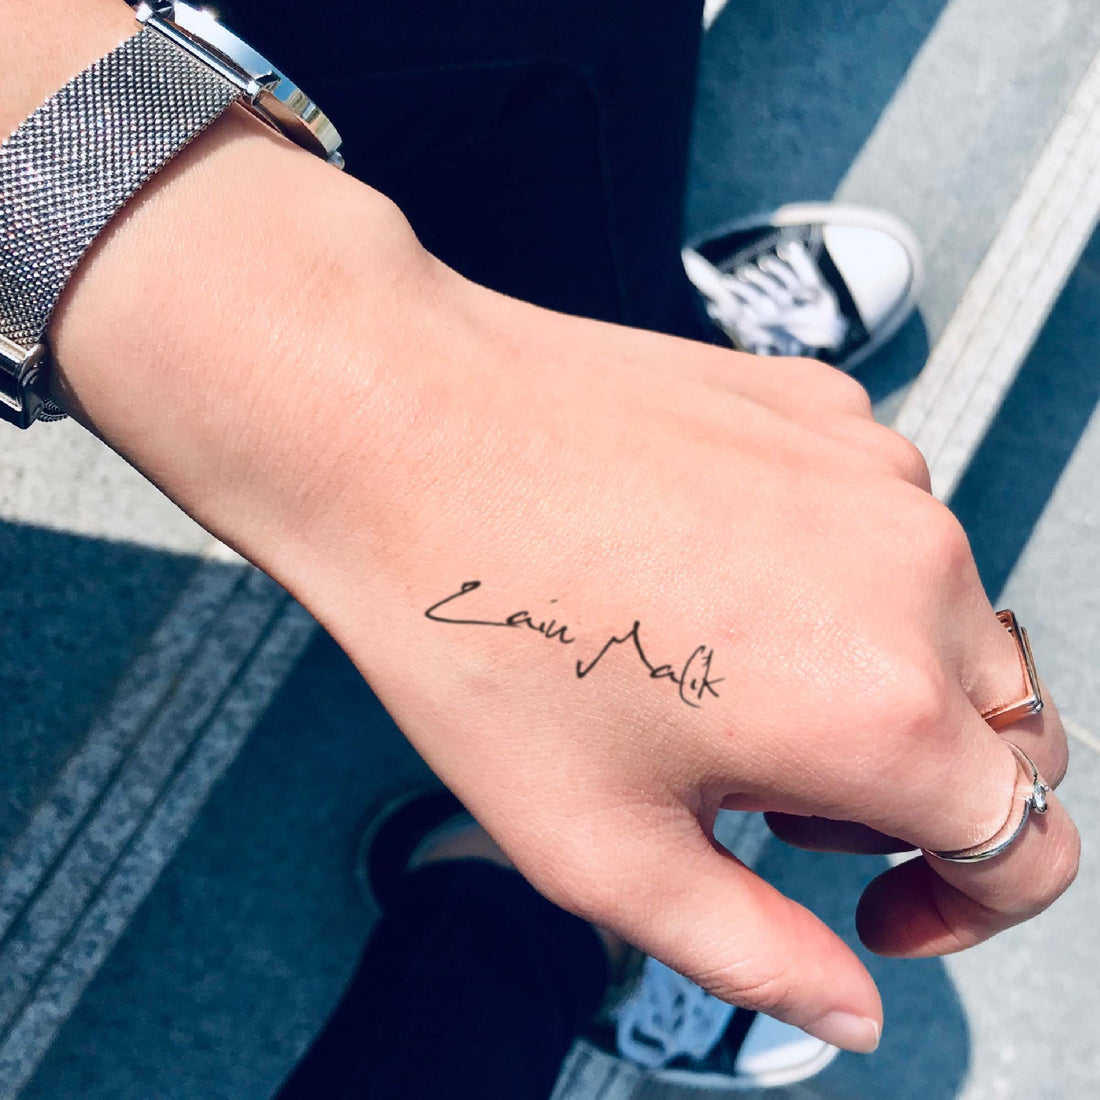 Zain Malik custom temporary tattoo sticker design idea inspiration meanings removal arm wrist hand words font name signature calligraphy lyrics tour concert outfits merch accessory gift souvenir costumes wear dress up code